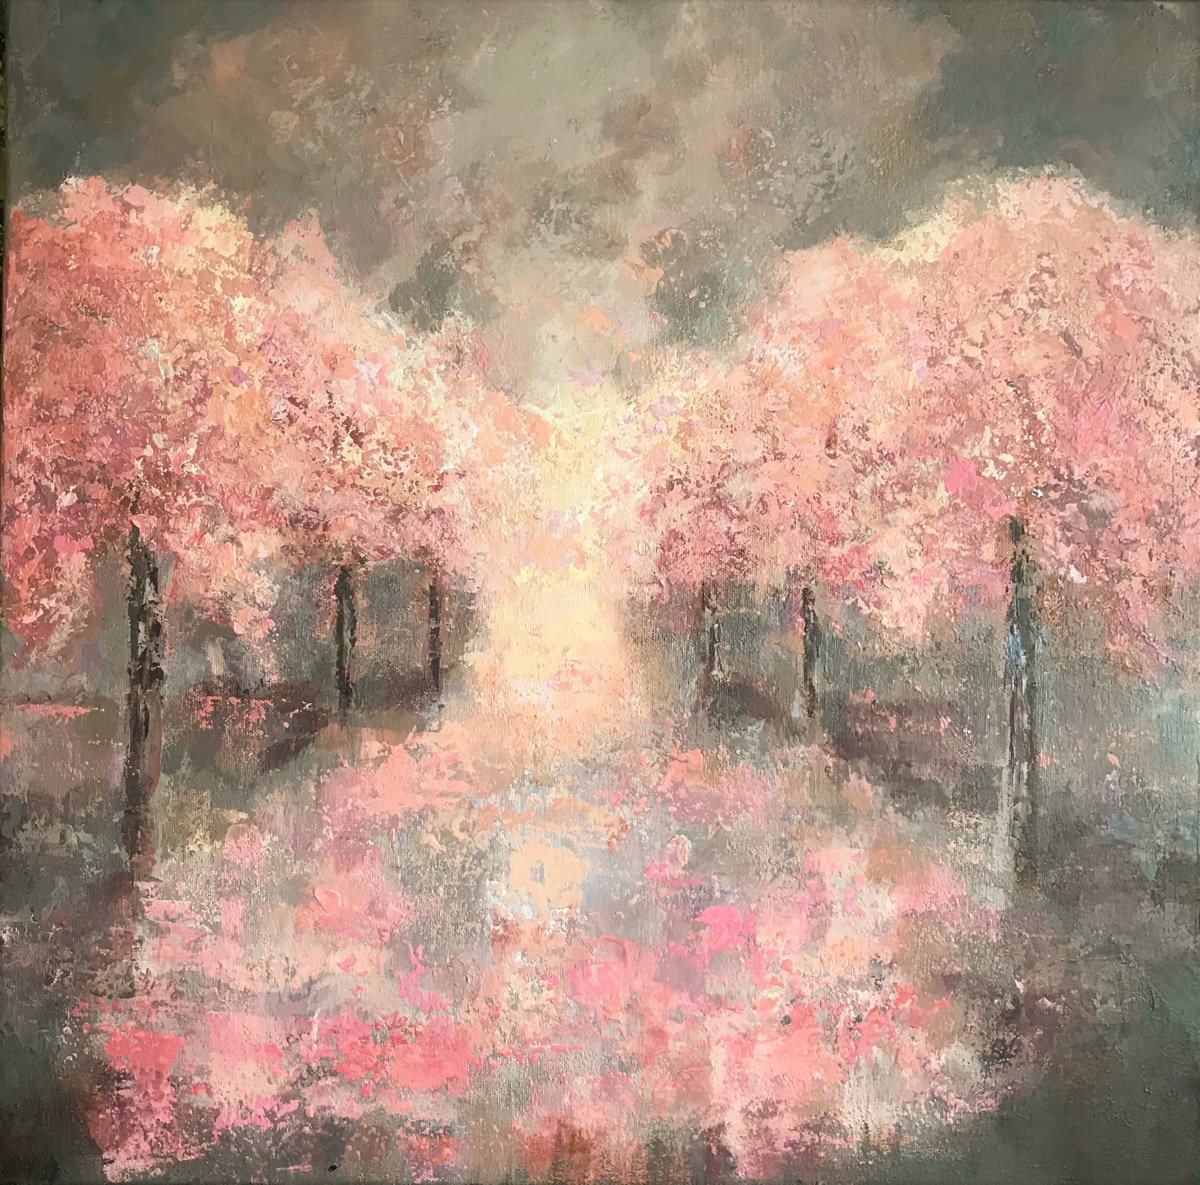 Blossom in the Rain by Colette Baumback